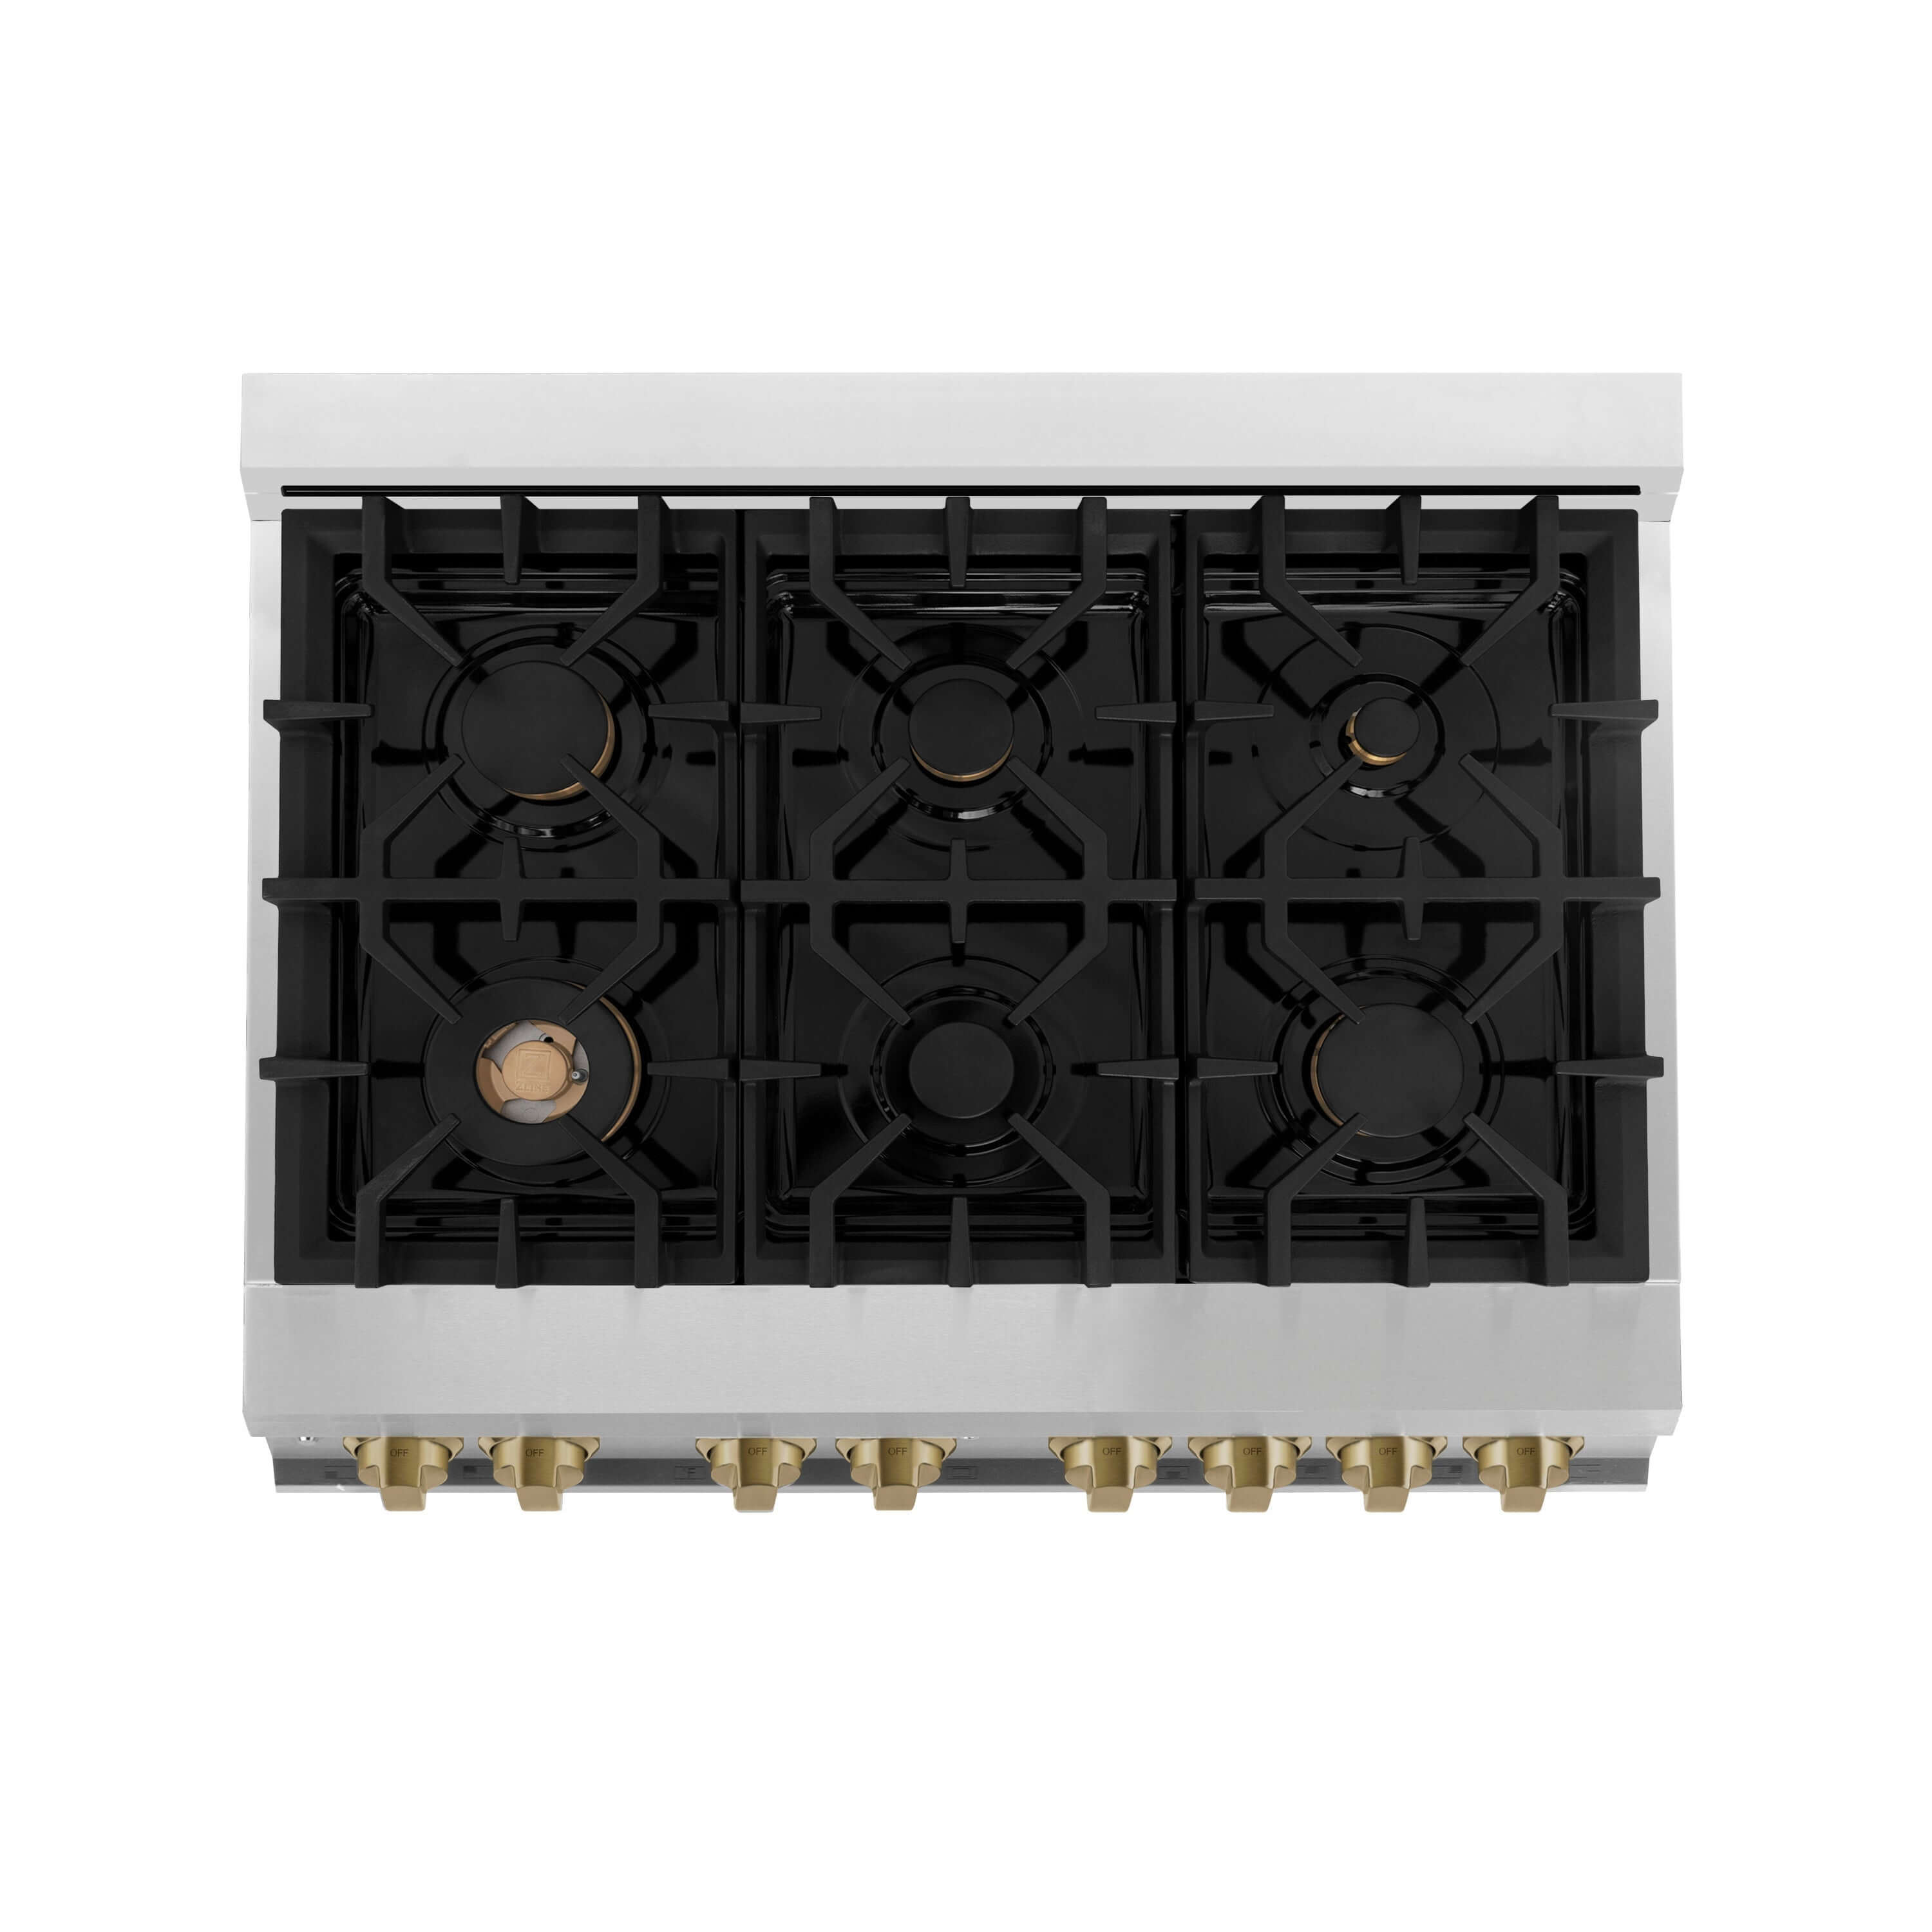 ZLINE 36" Autograph Edition range from above showing 6-burner cooktop with brass burners and black porcelain top.